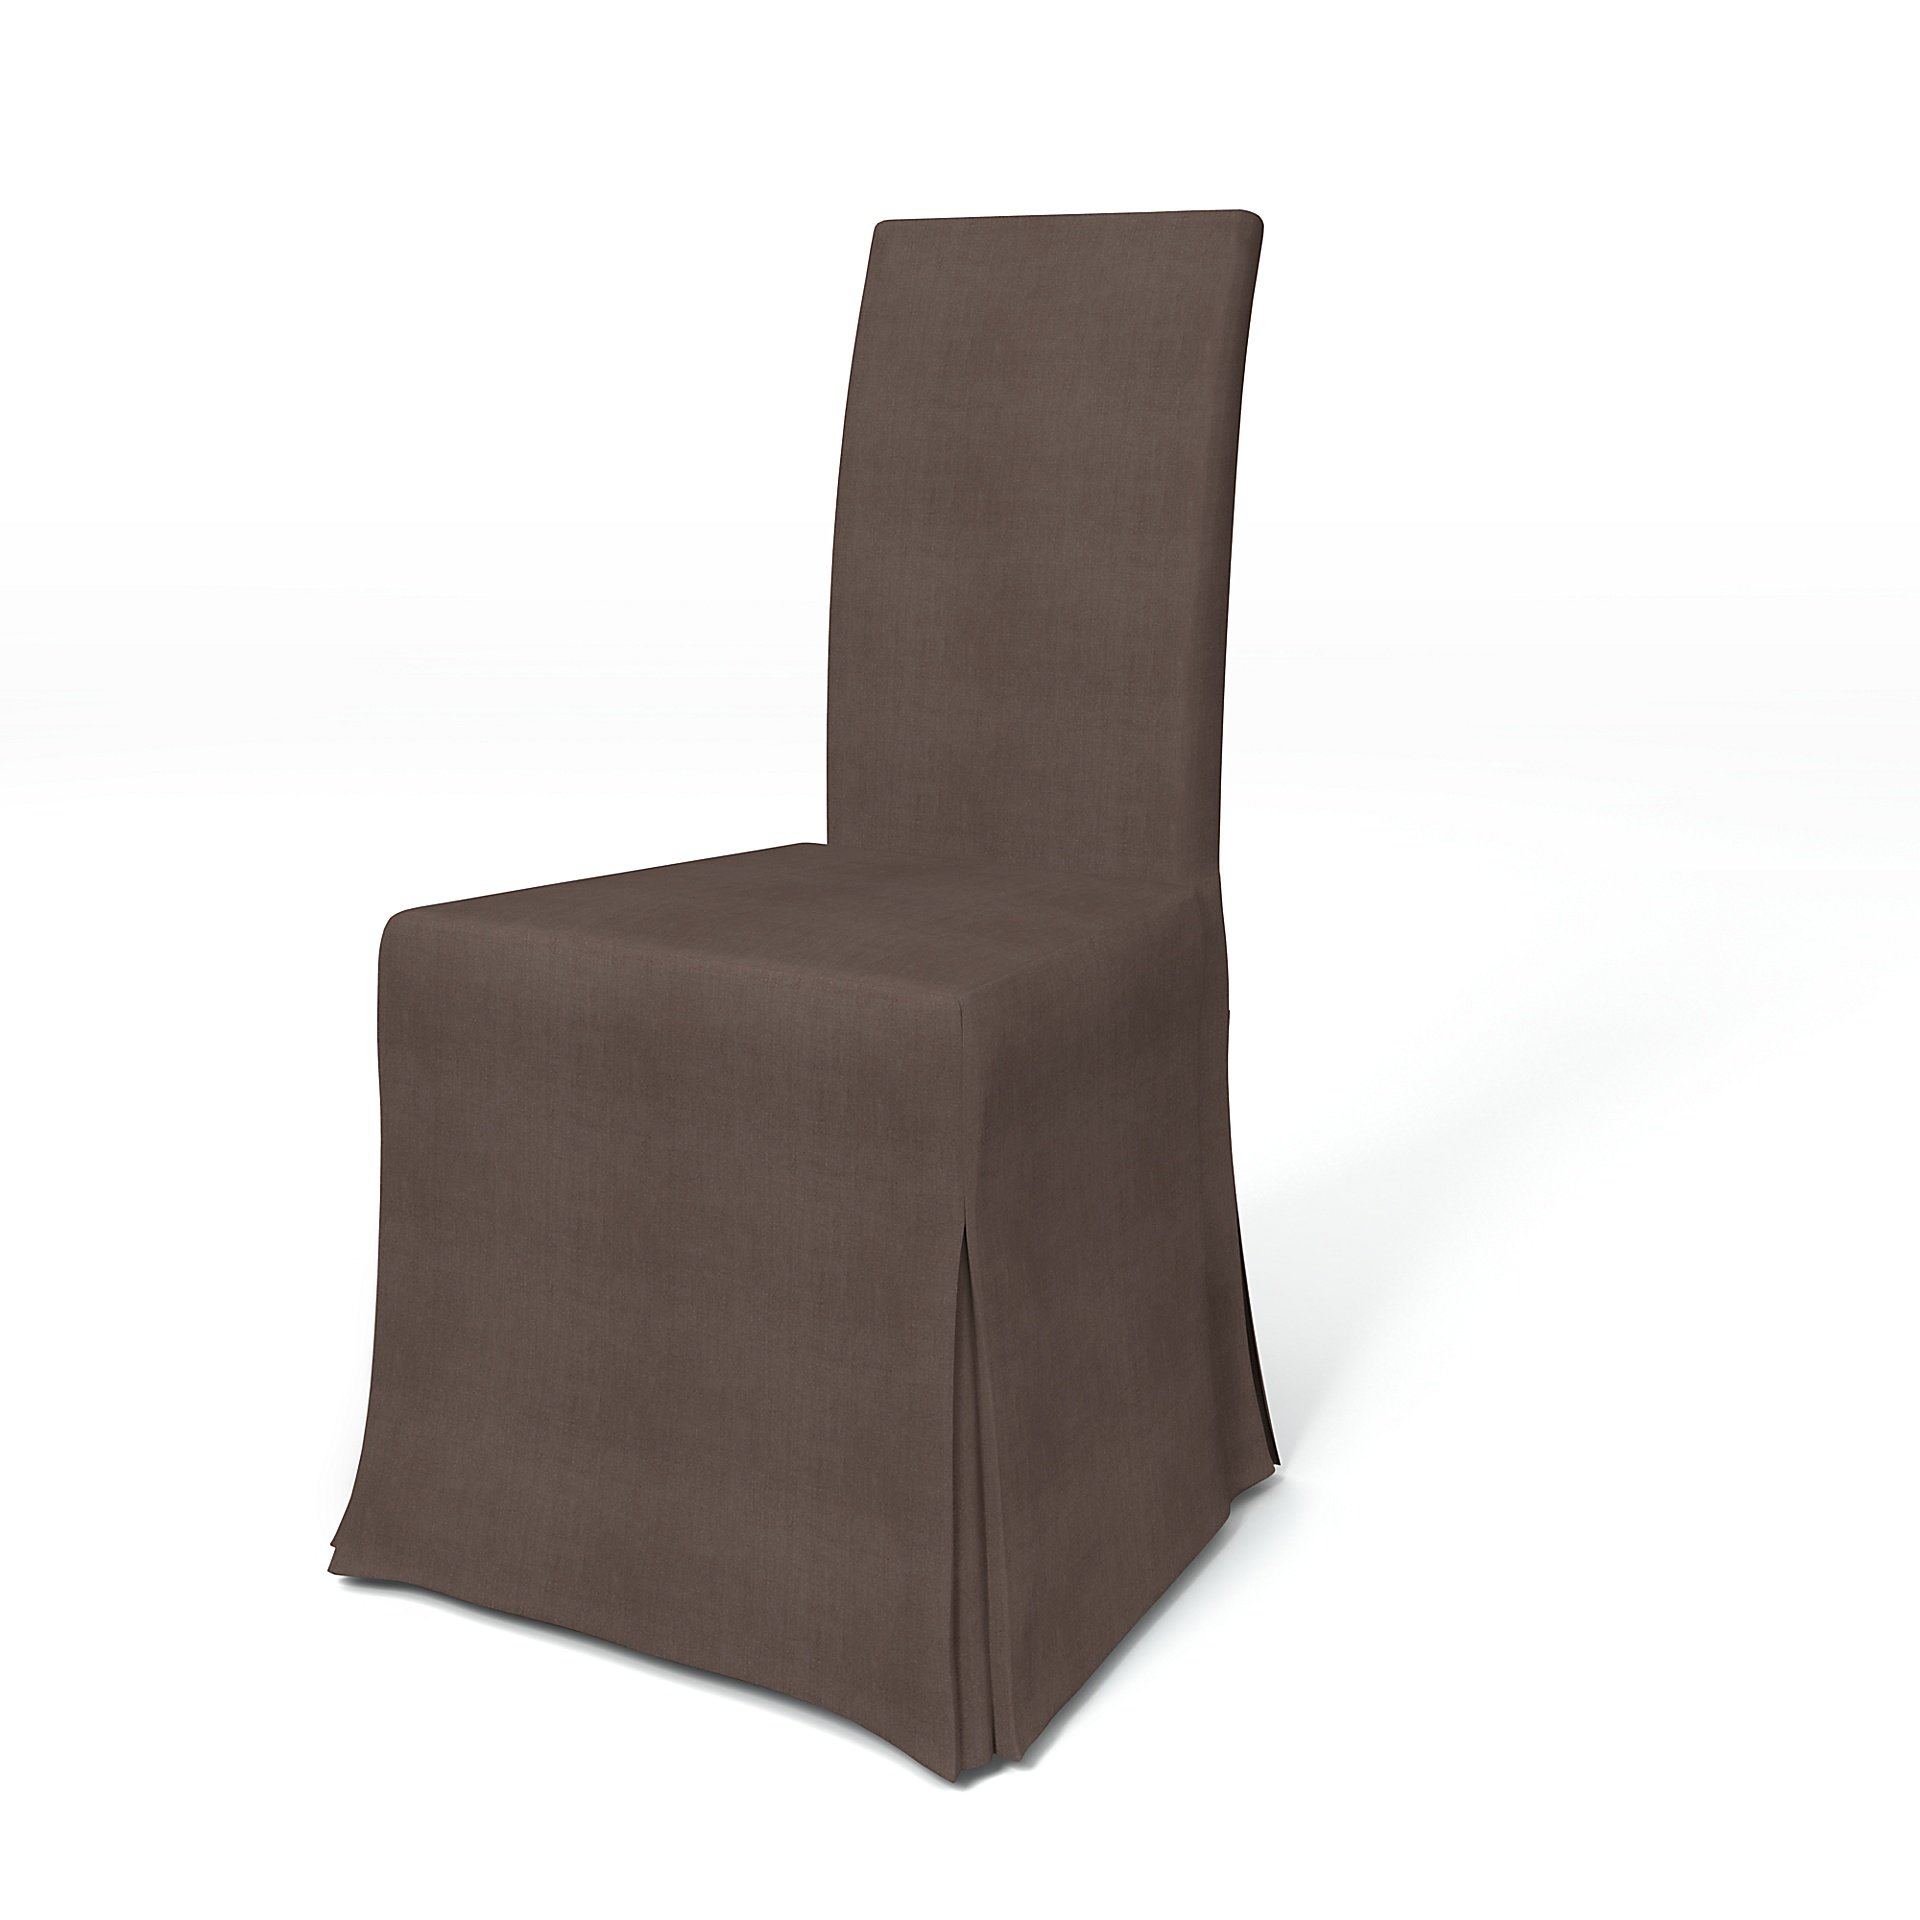 IKEA - Harry Dining Chair Cover, Cocoa, Linen - Bemz